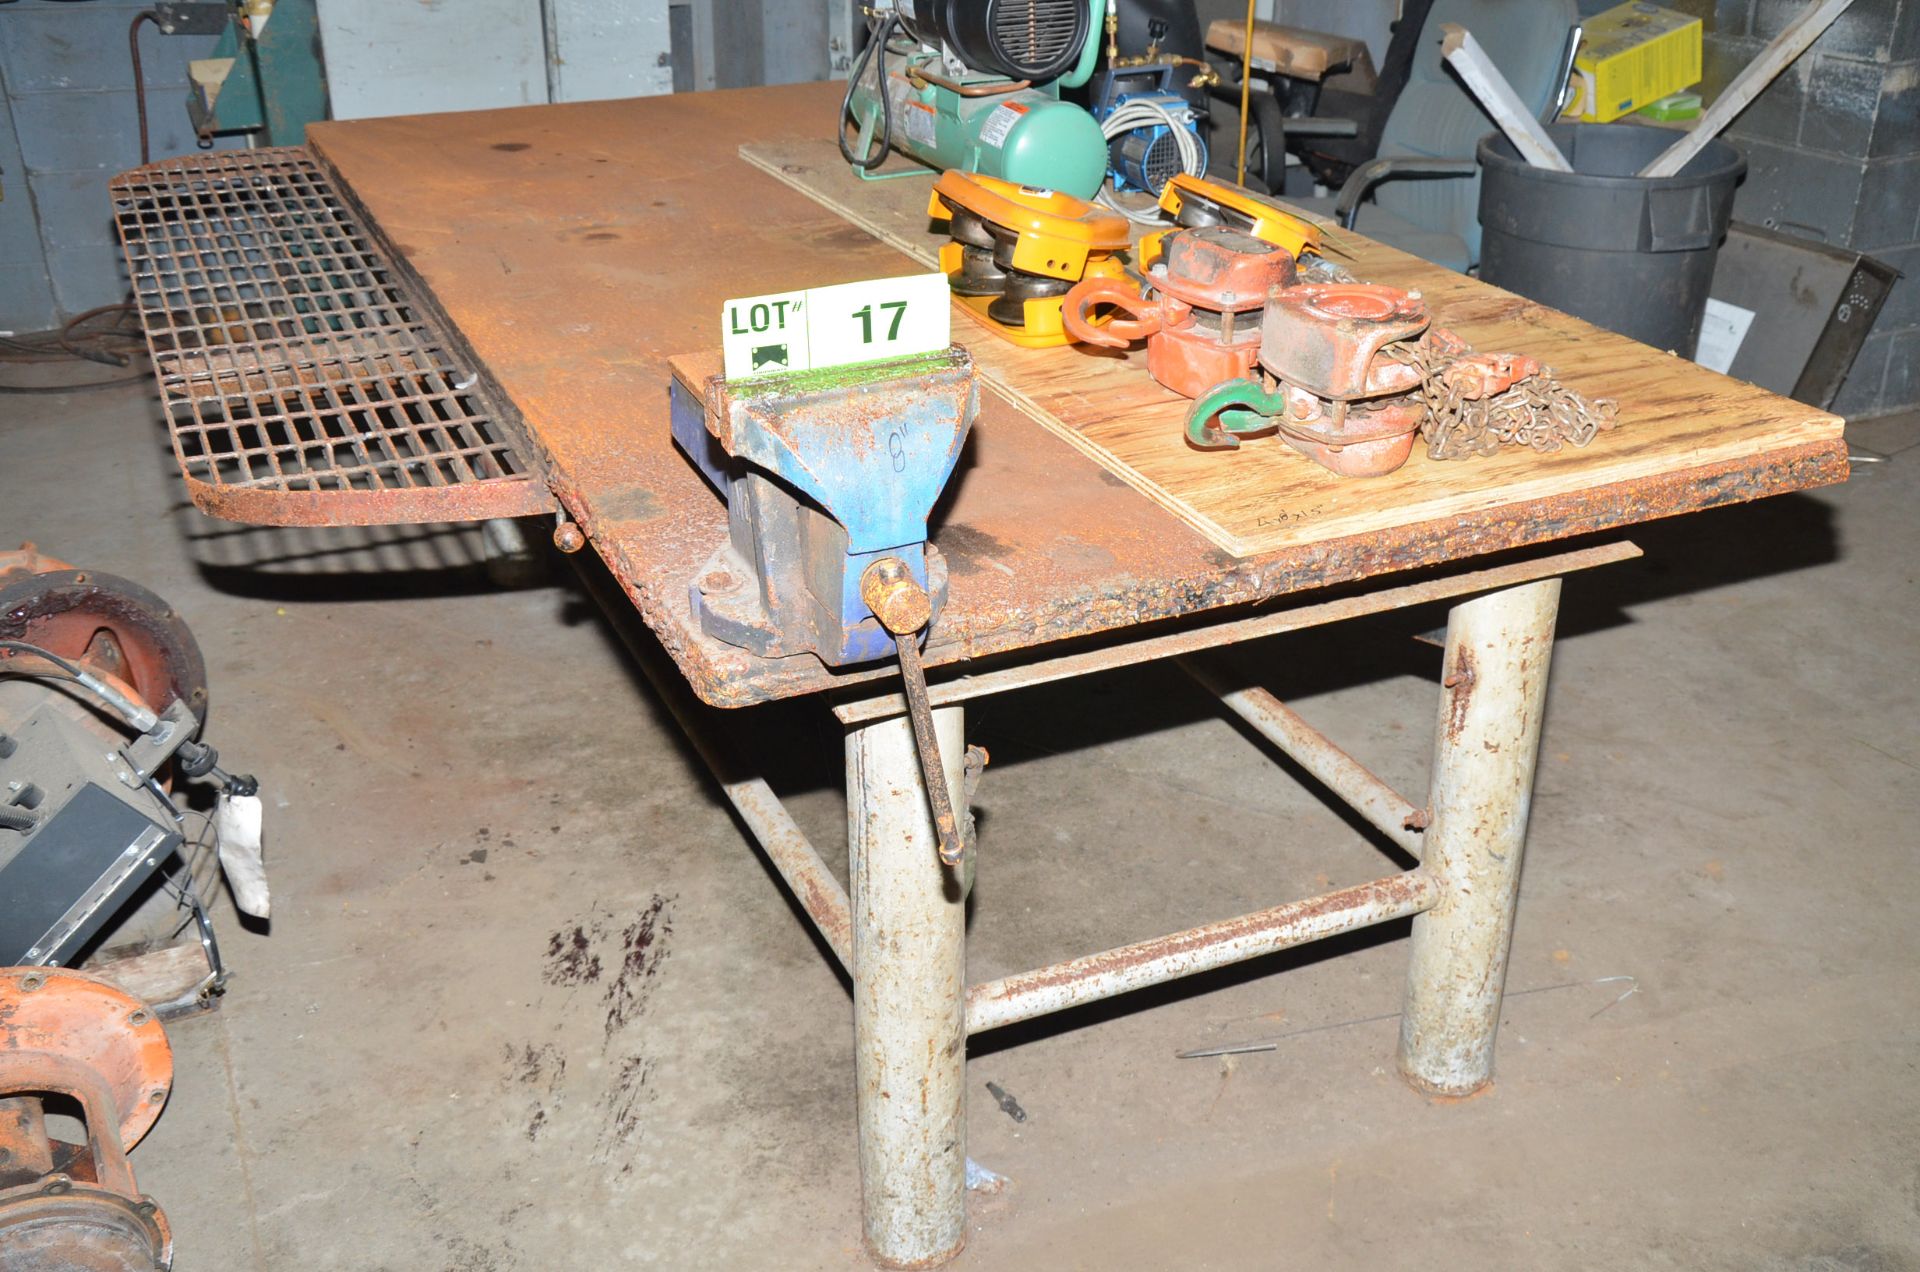 4'X8'X1.5" STEEL WORK BENCH WITH 8" VISE [RIGGING FEES FOR LOT #17 - $150 USD PLUS APPLICABLE